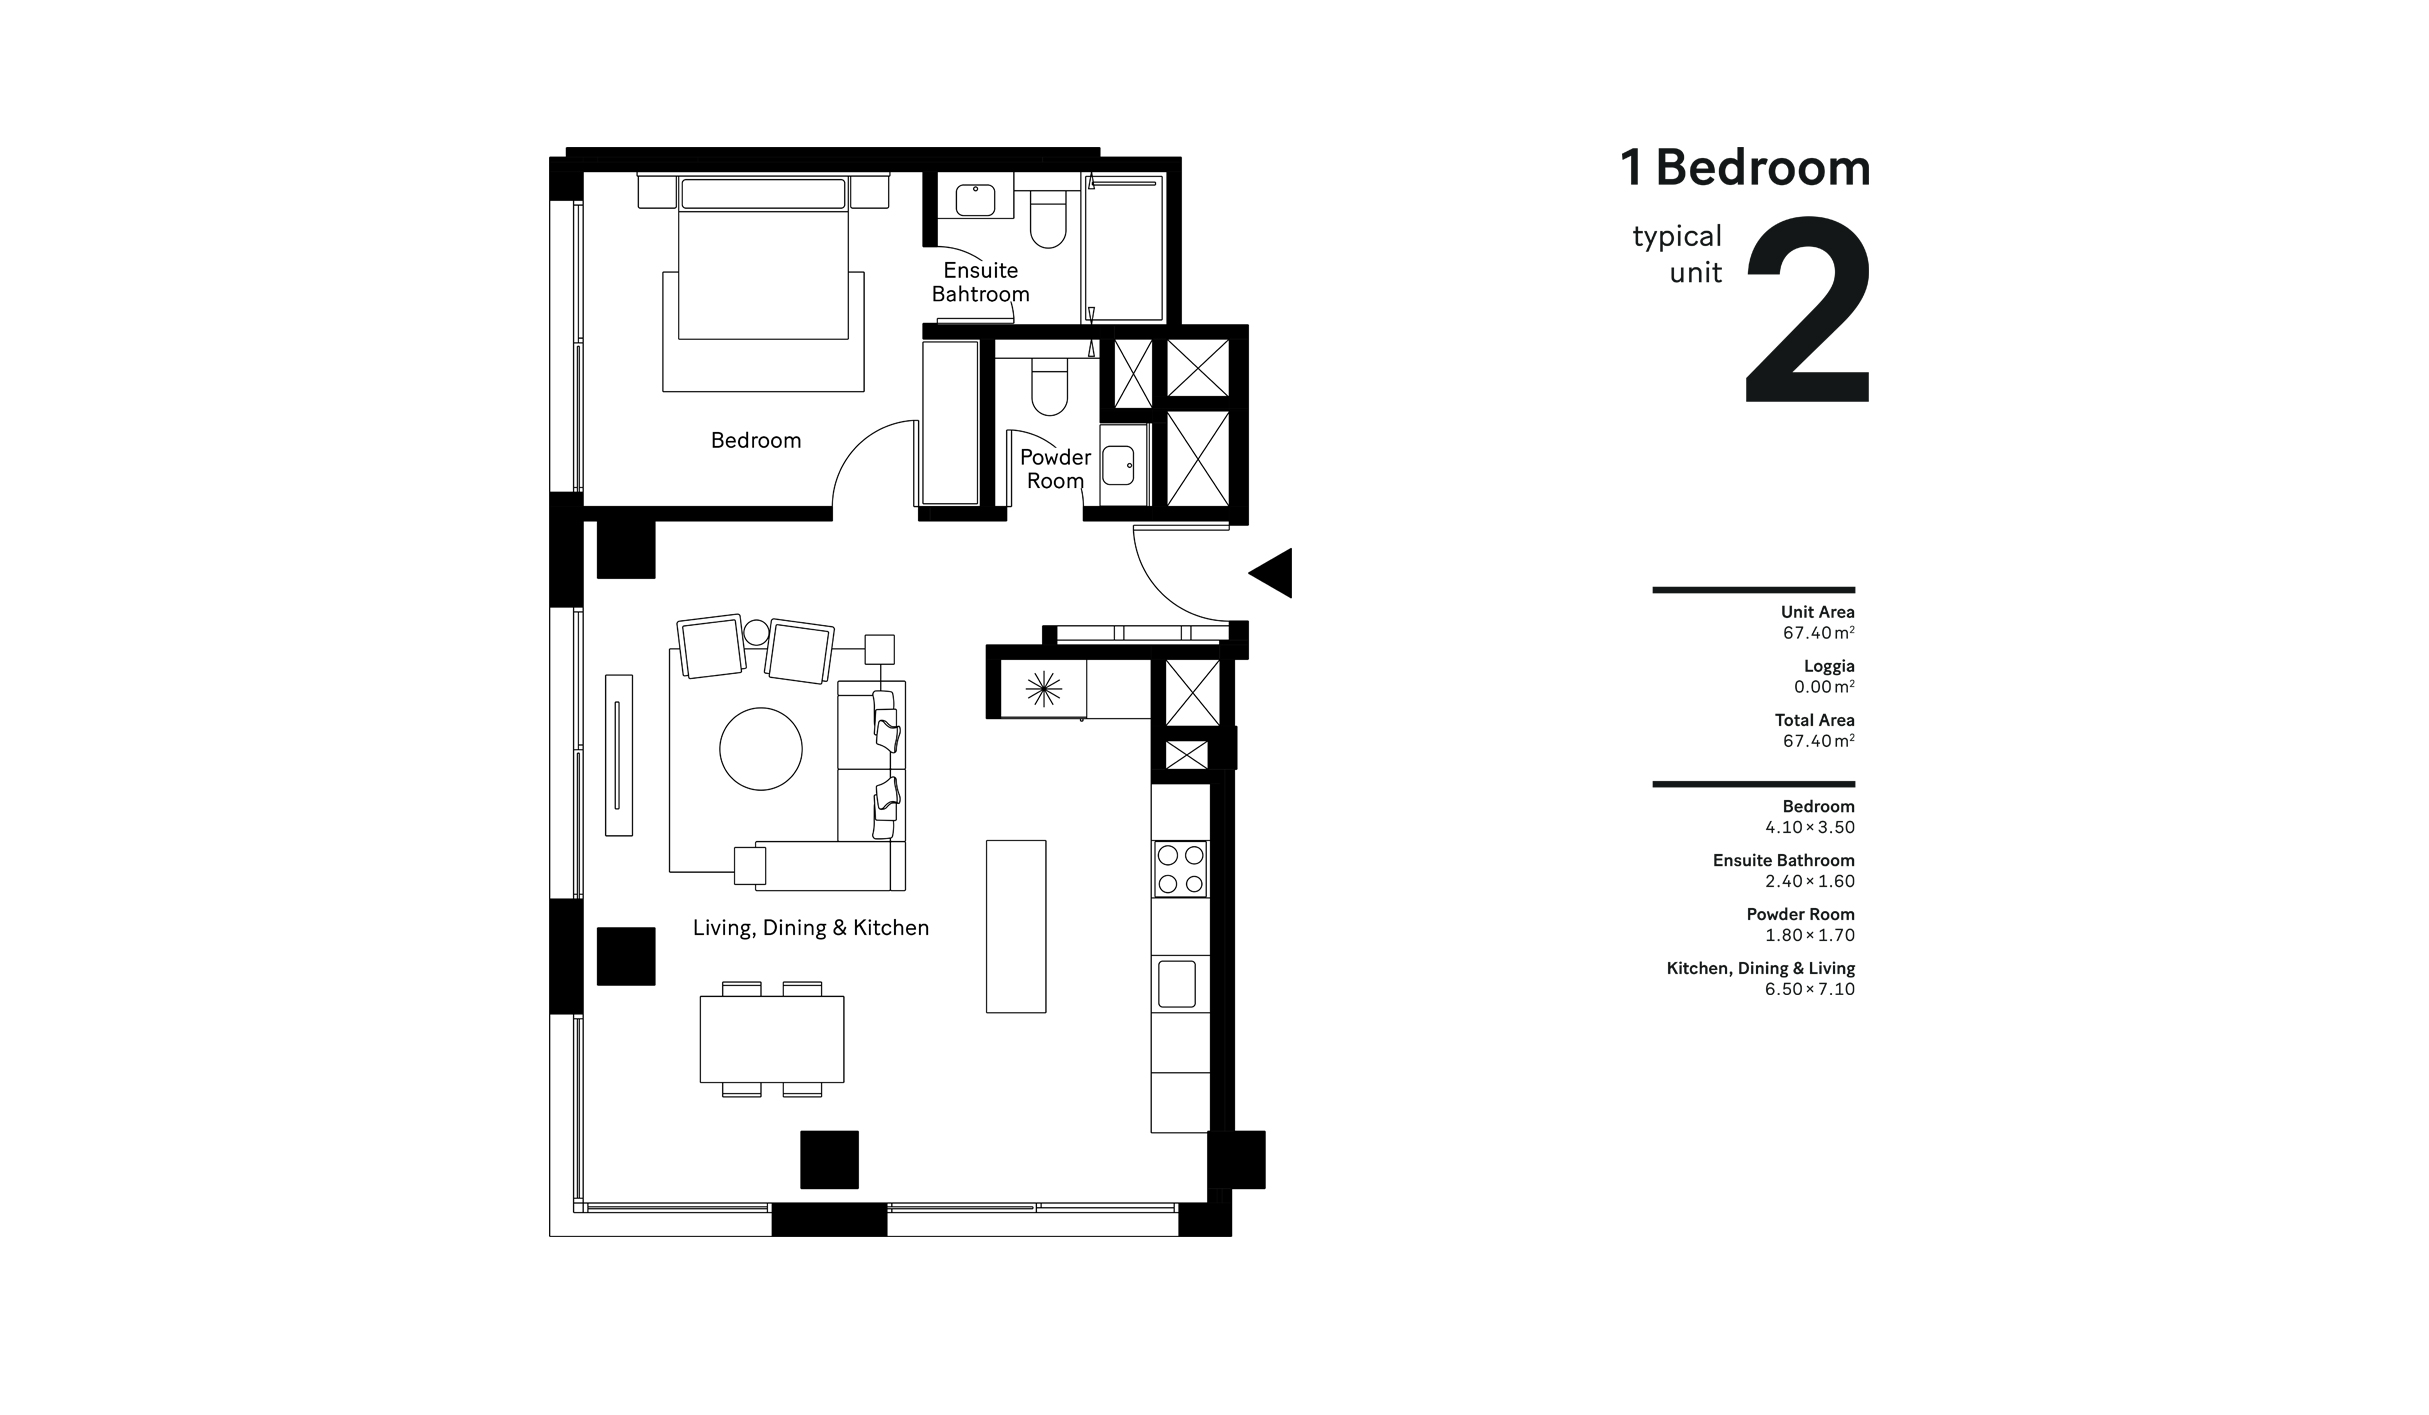 1 Bedroom, Typical Unit 2